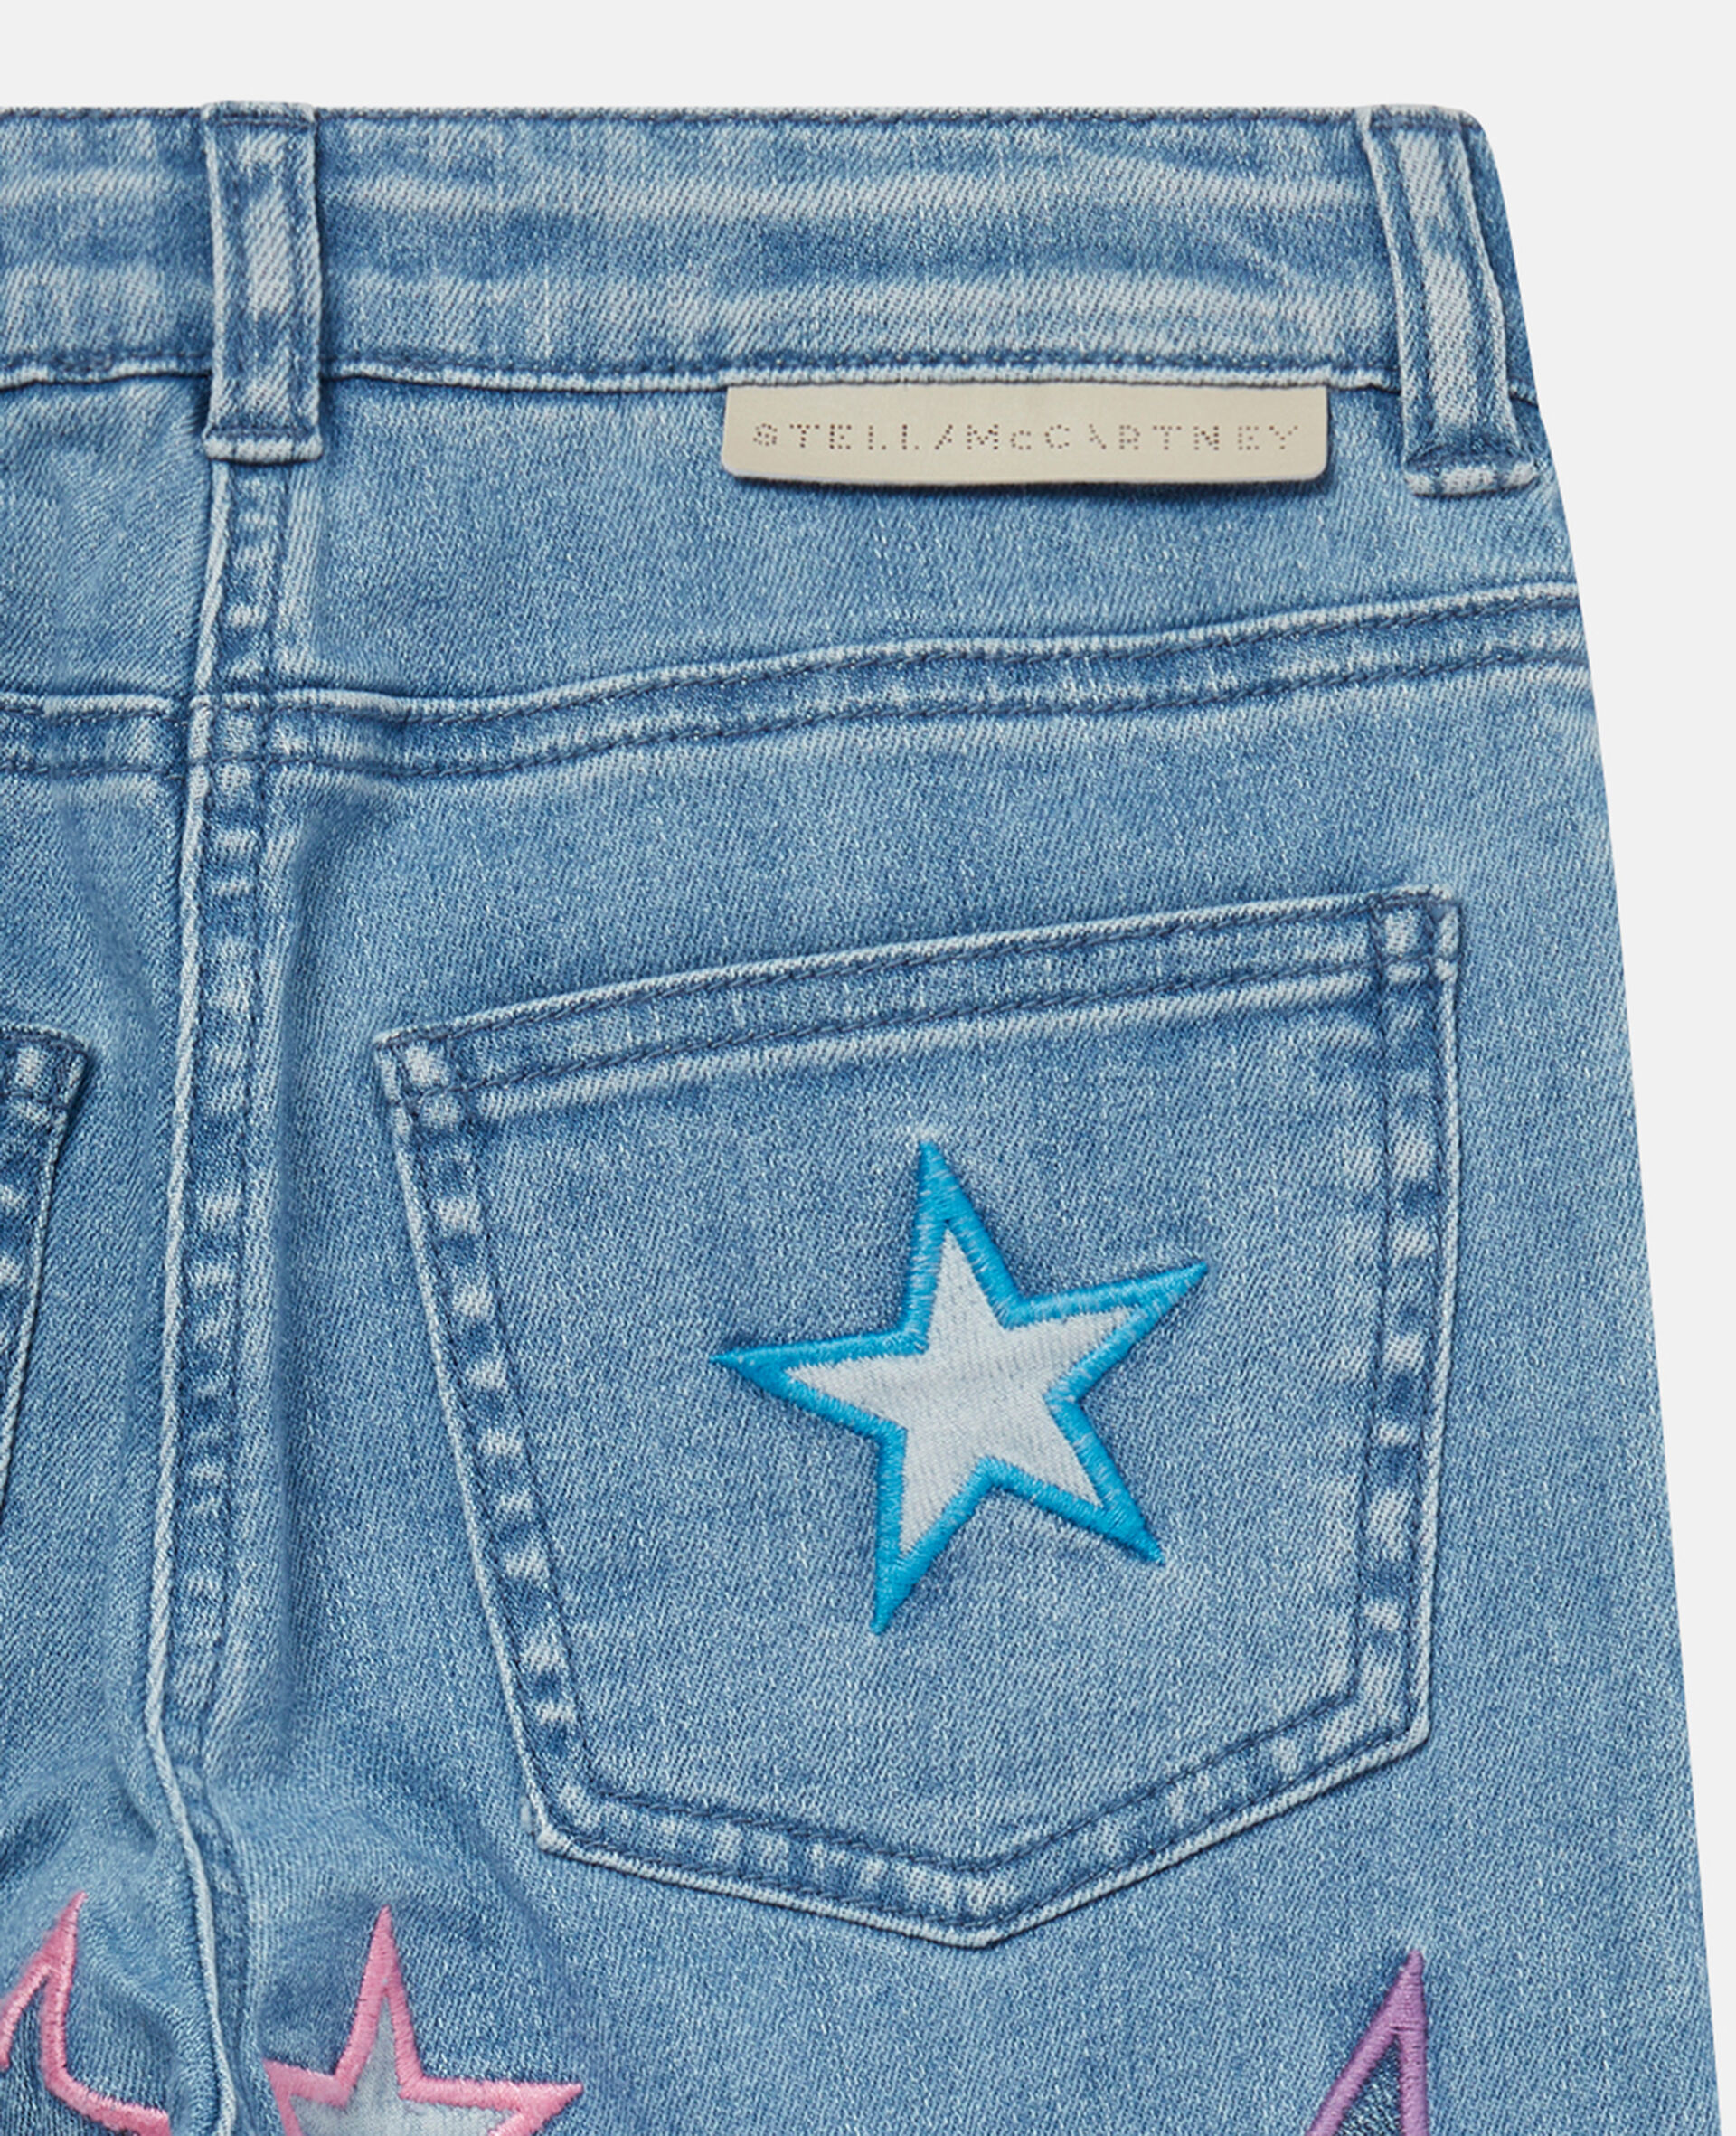 Embroidered Star Denim Trousers-Blue-large image number 3